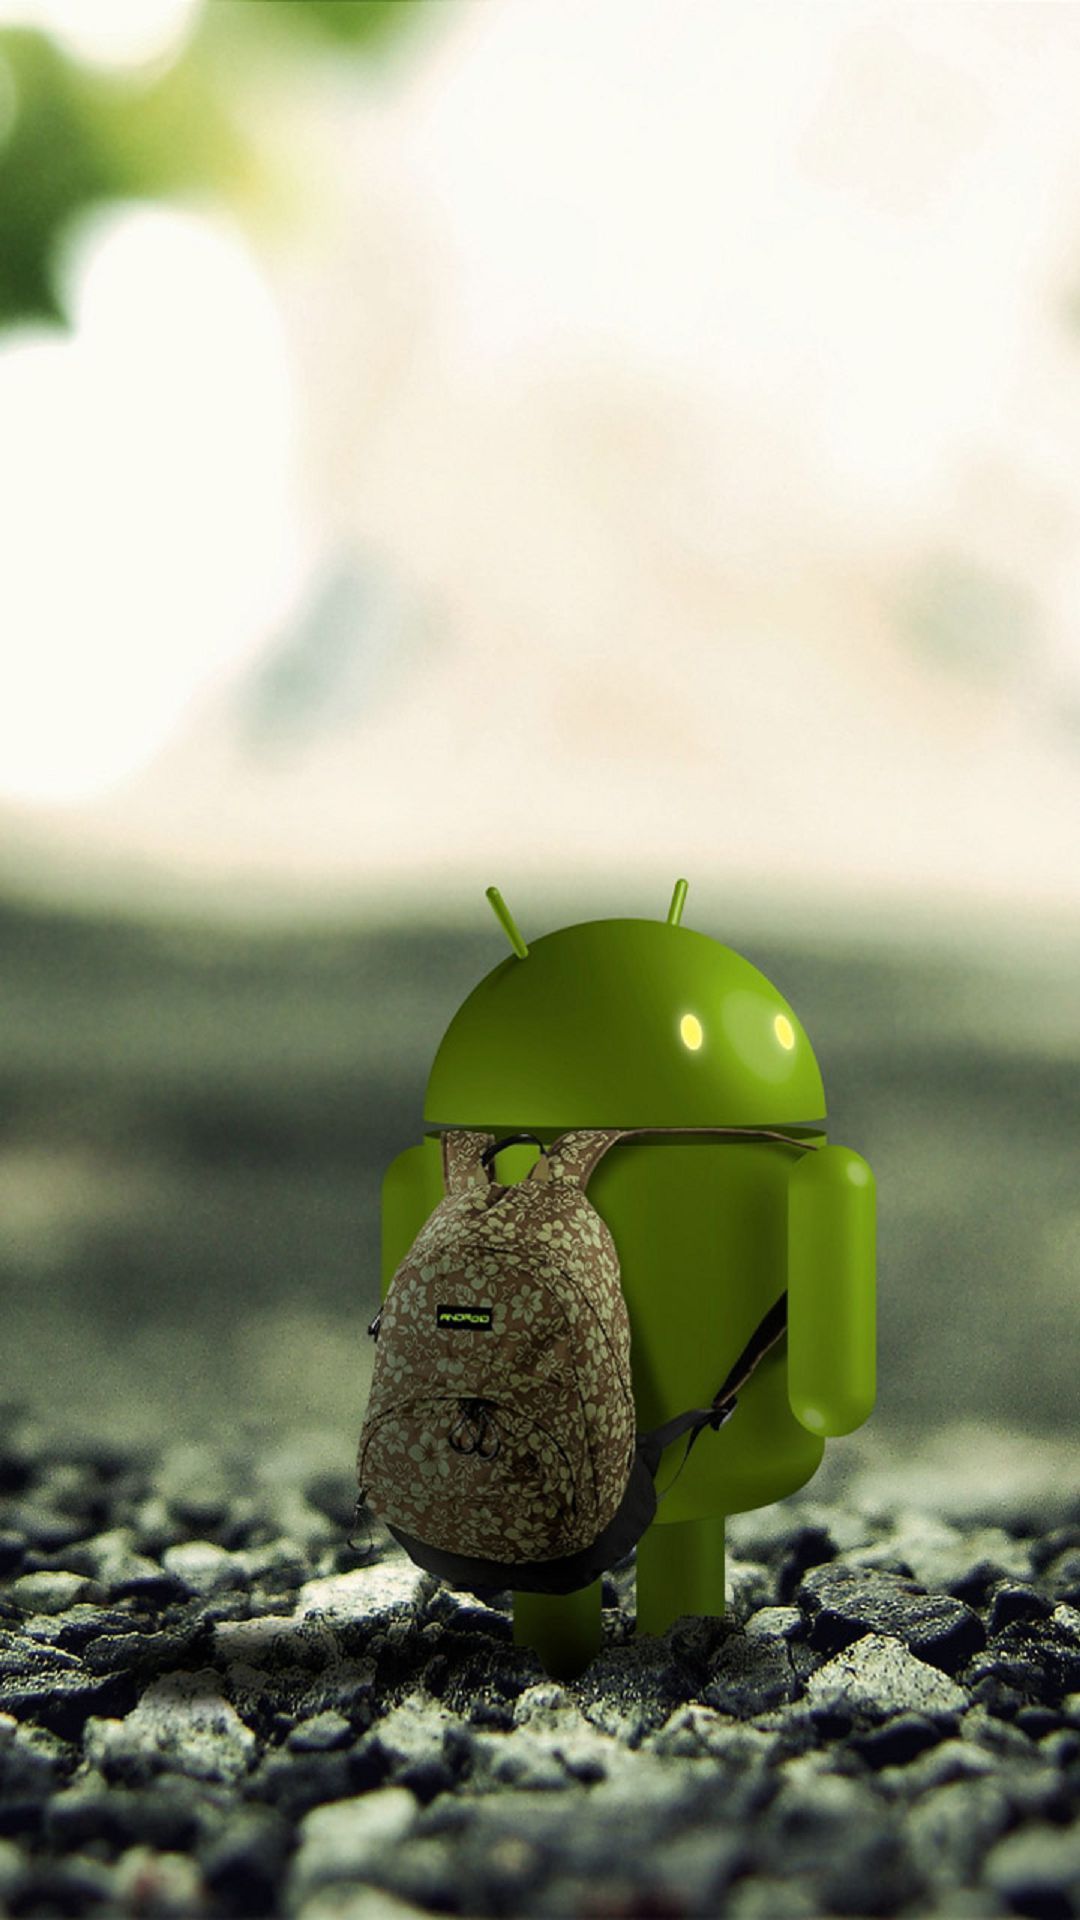 Robot Android Wallpapers on WallpaperDog